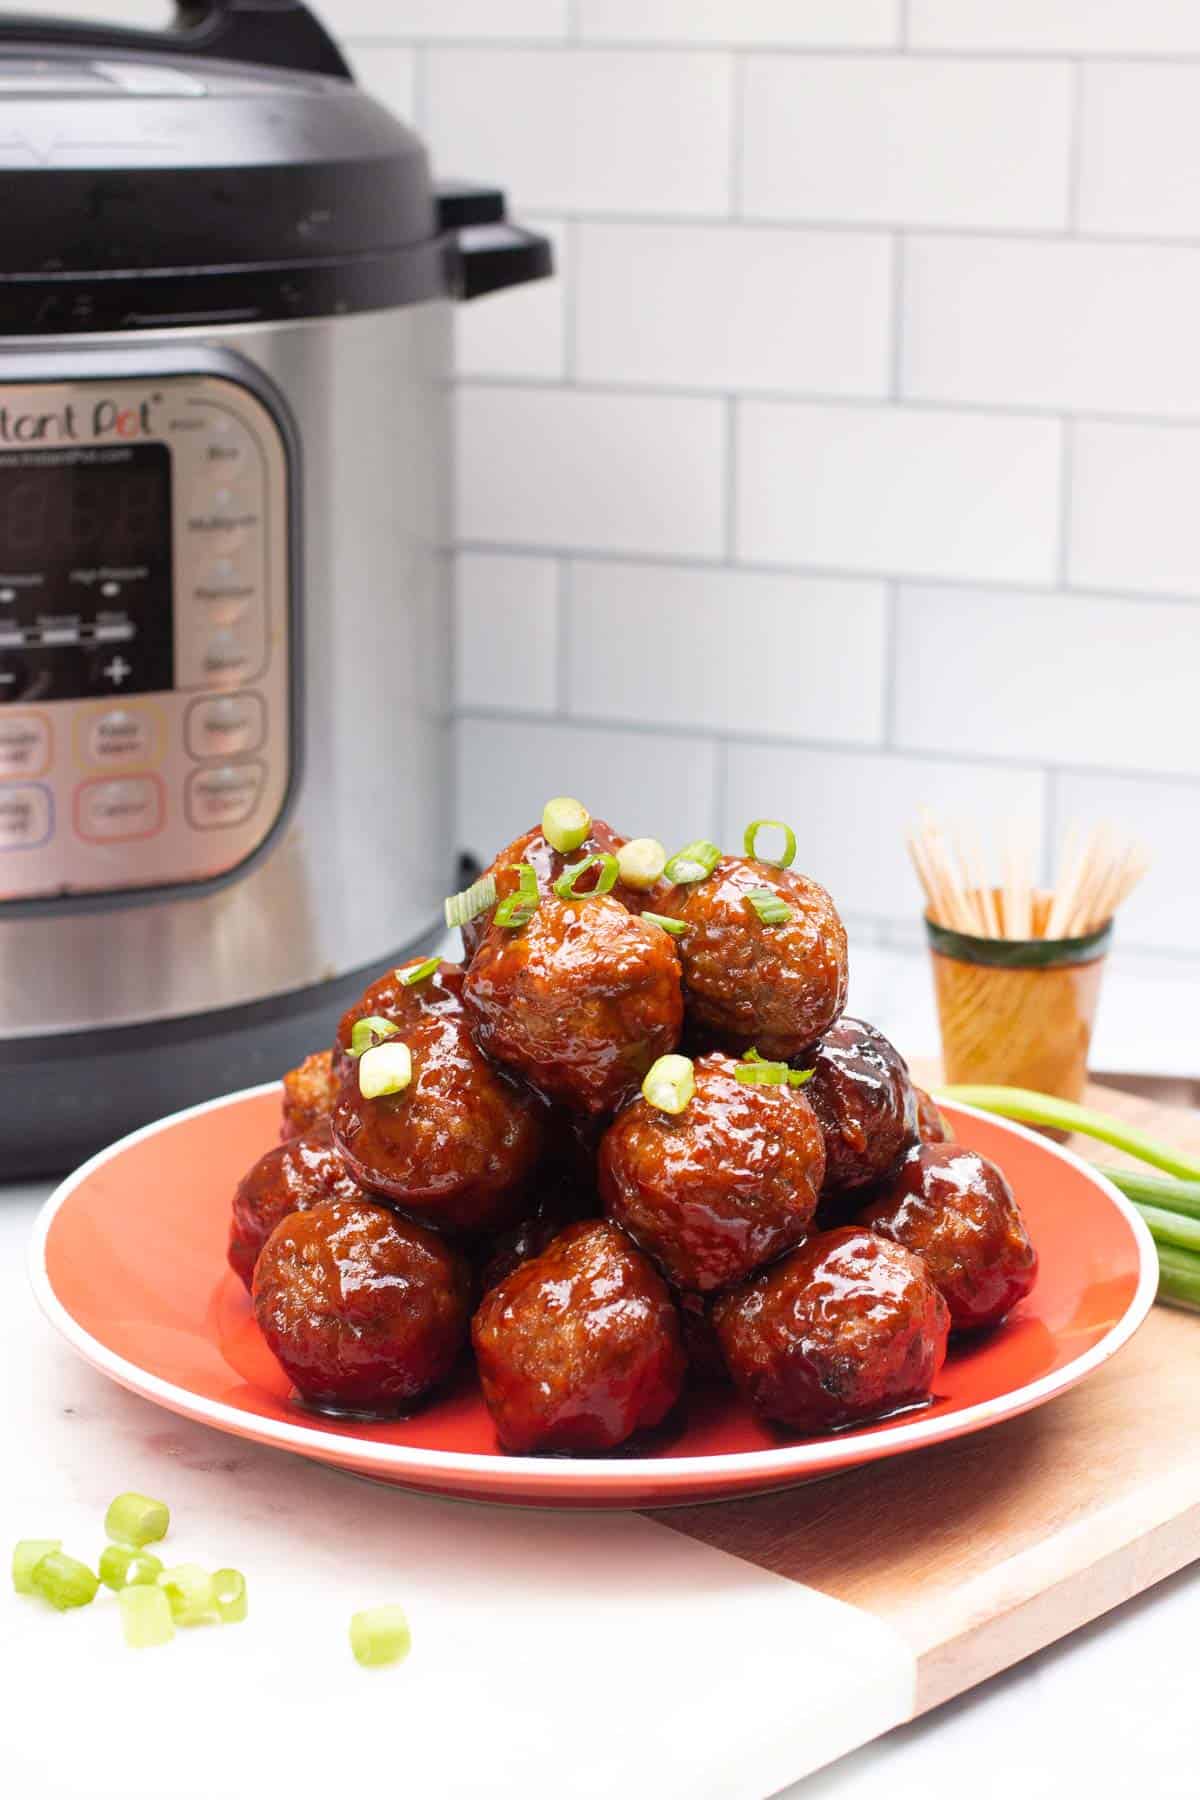 How to Cook Frozen Meatballs in a Pressure Cooker